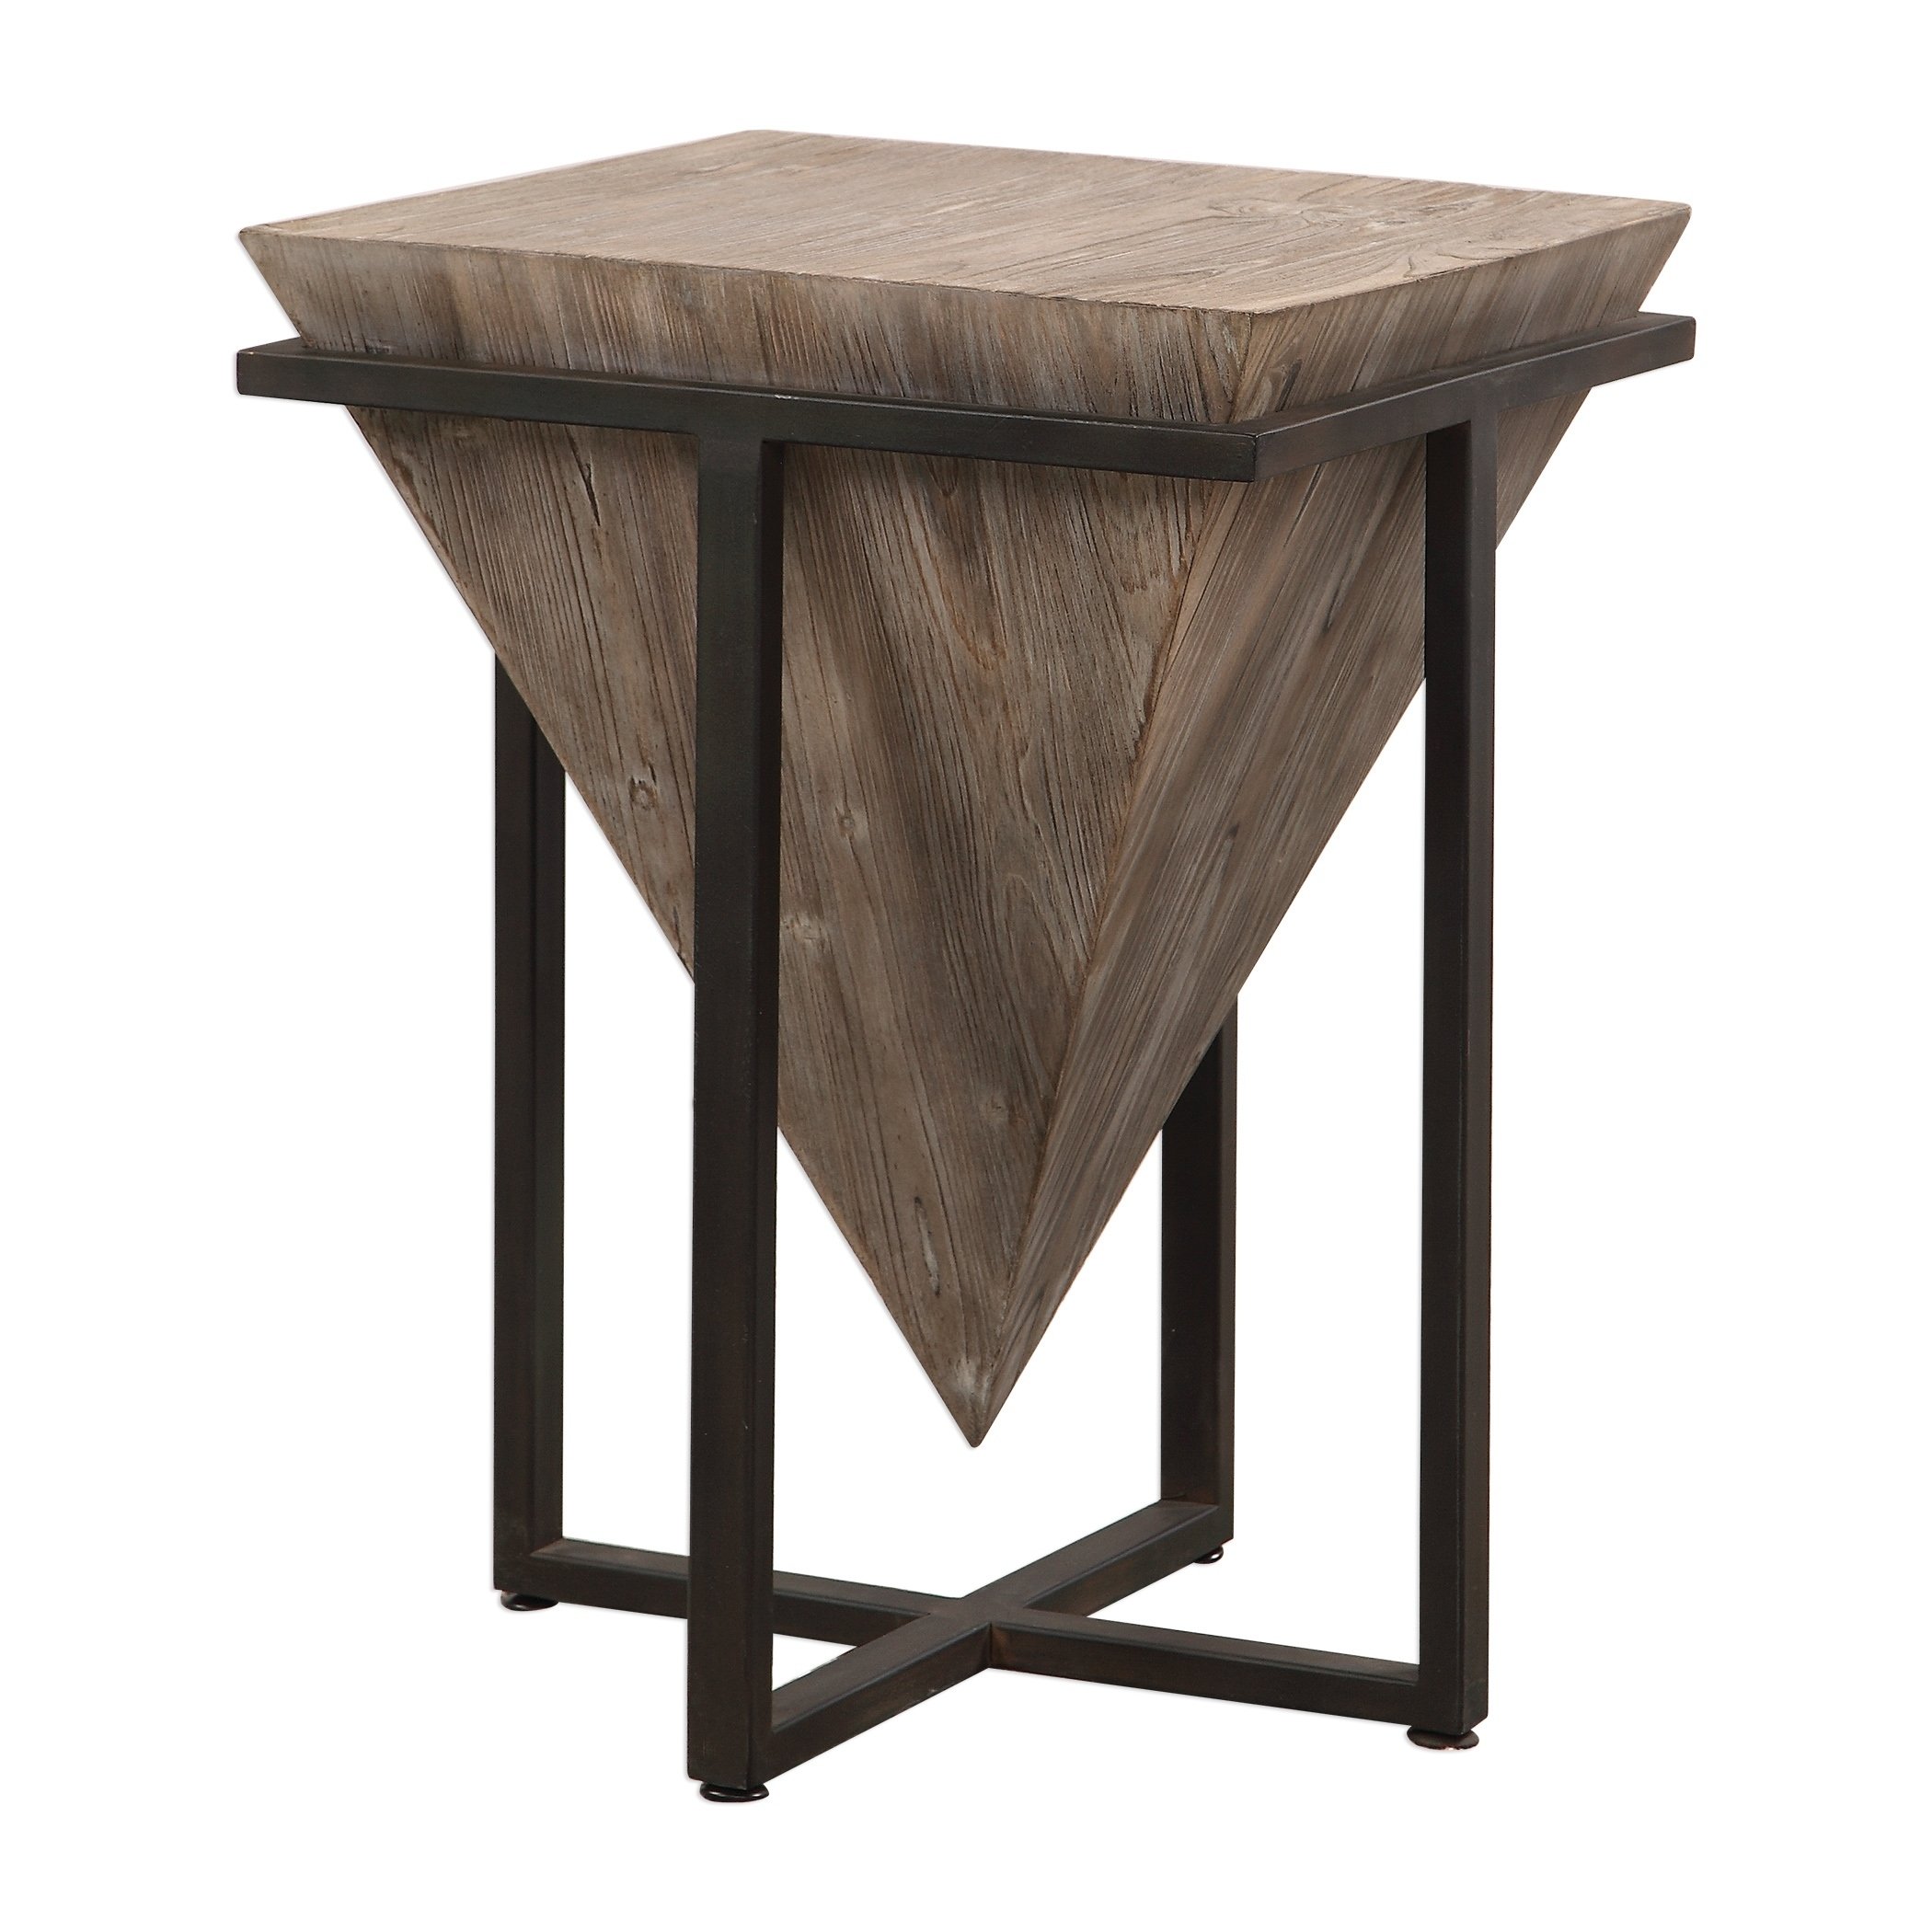 uttermost bertrand aged black and grey wash wood accent table free shipping today anthropologie furniture patio chairs with umbrella asian lamps small plastic large tilting